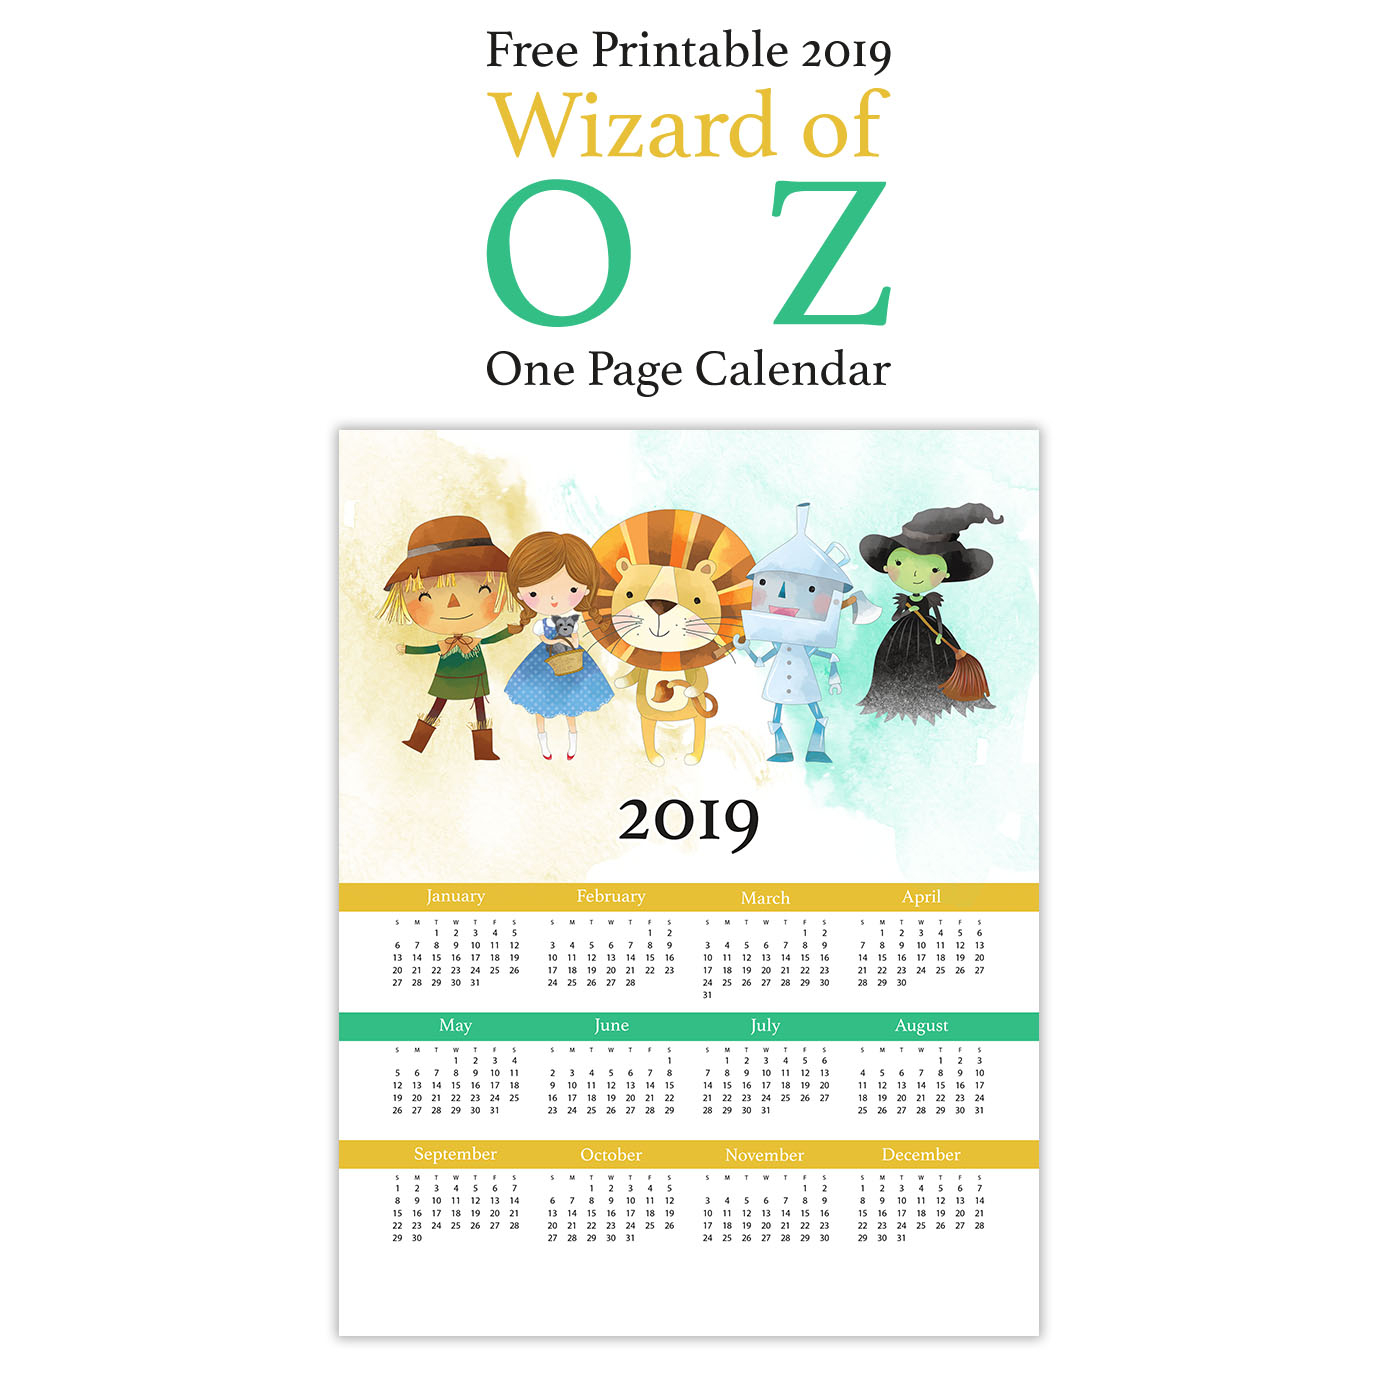 Free Printable 2019 Wizard Of Oz One Page Calendar The 1